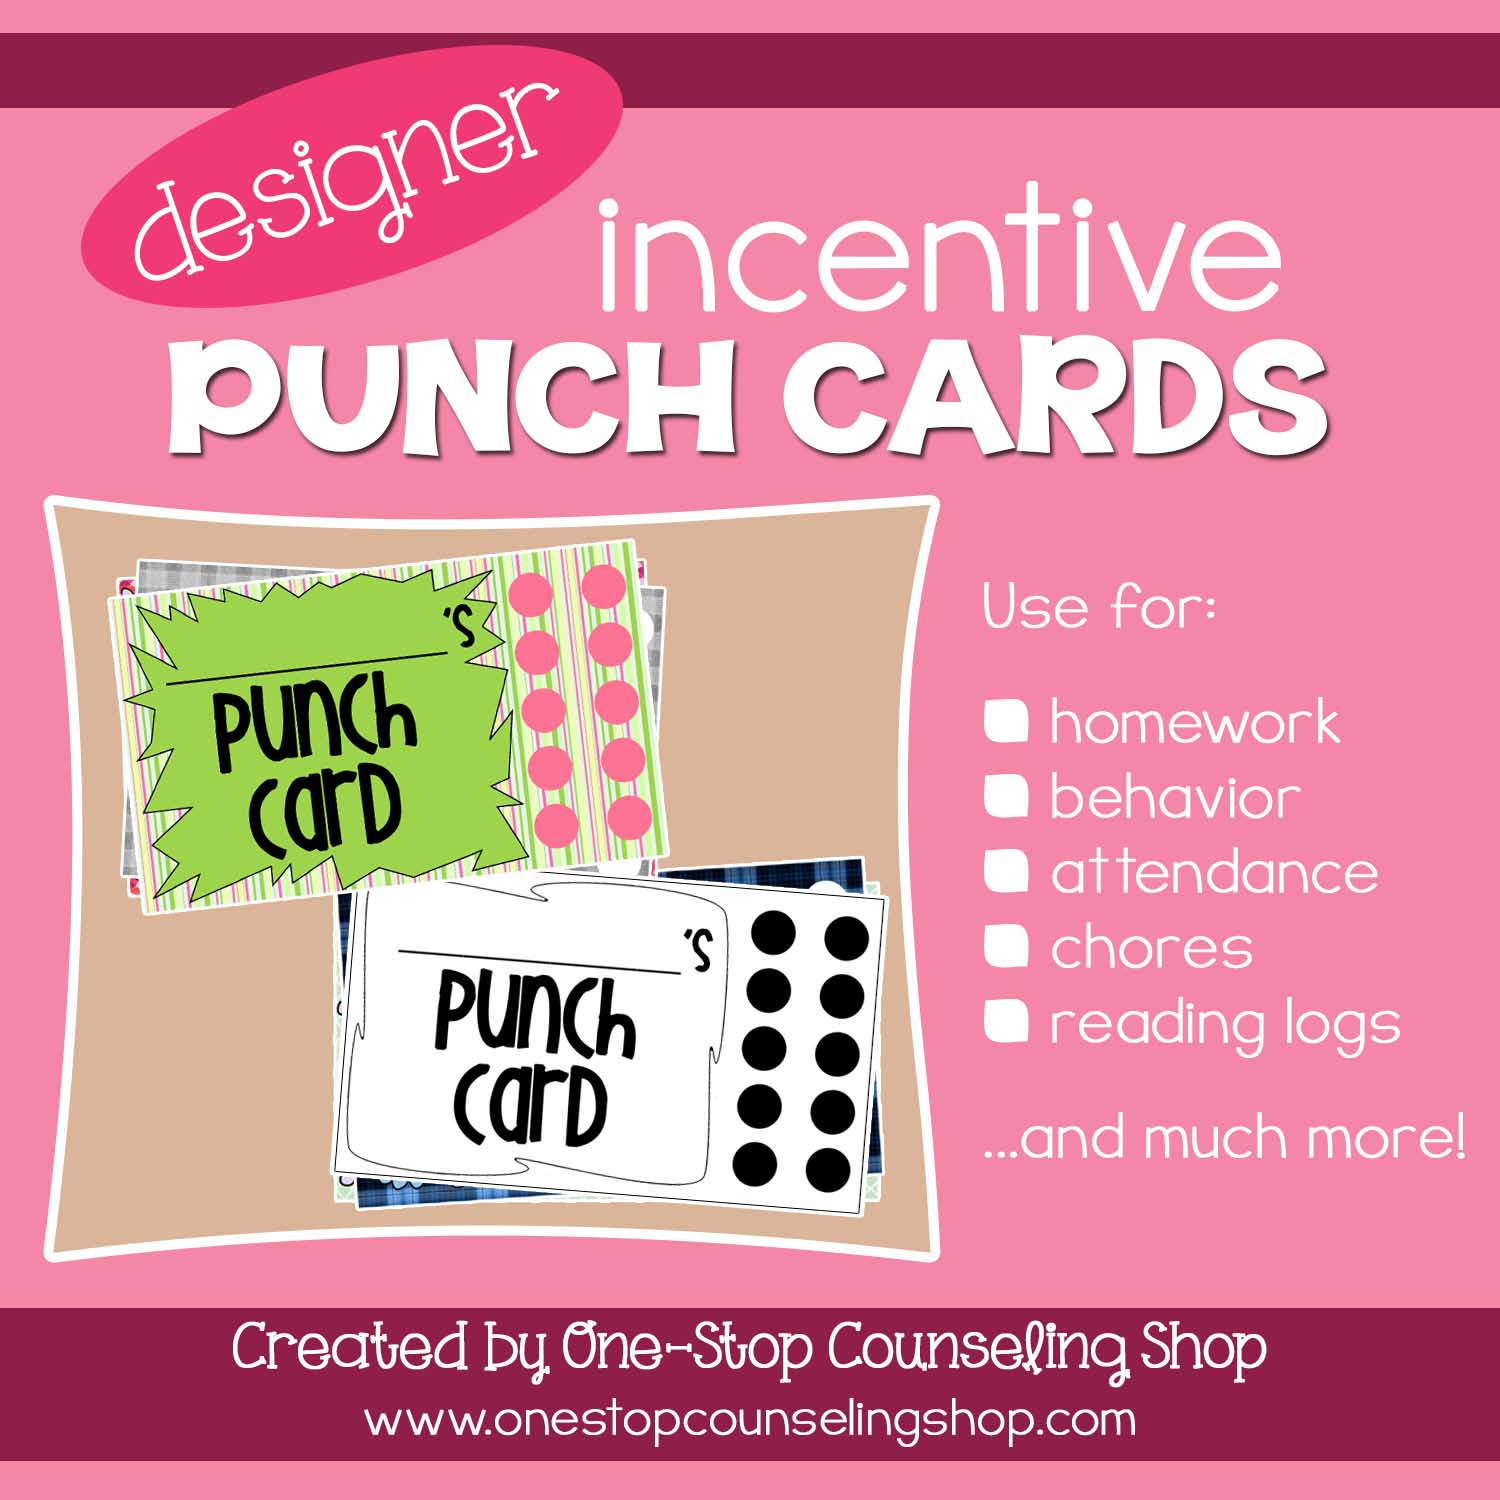 Simple Punch Cards for Positive Behavior Support - Mrs. Richardson's Class